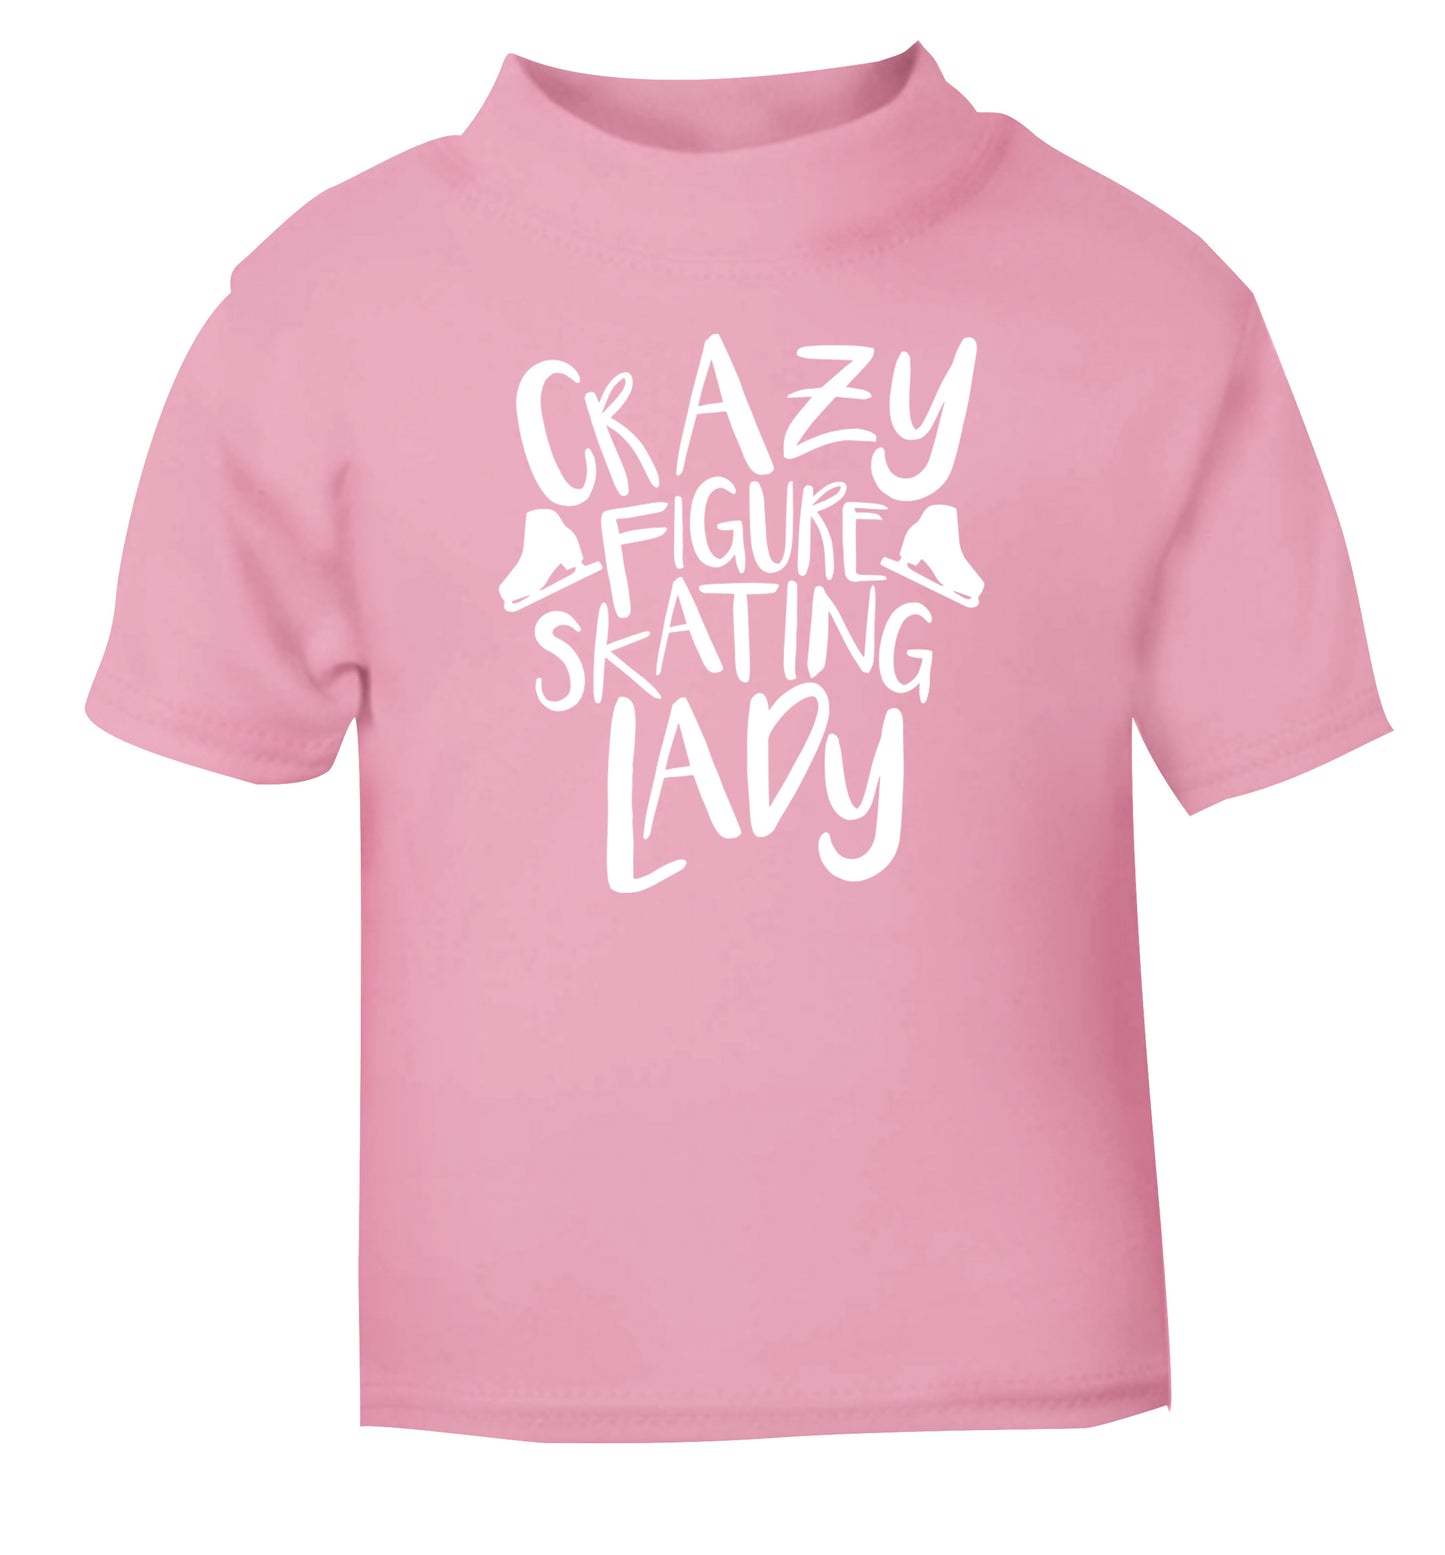 Crazy figure skating lady light pink Baby Toddler Tshirt 2 Years